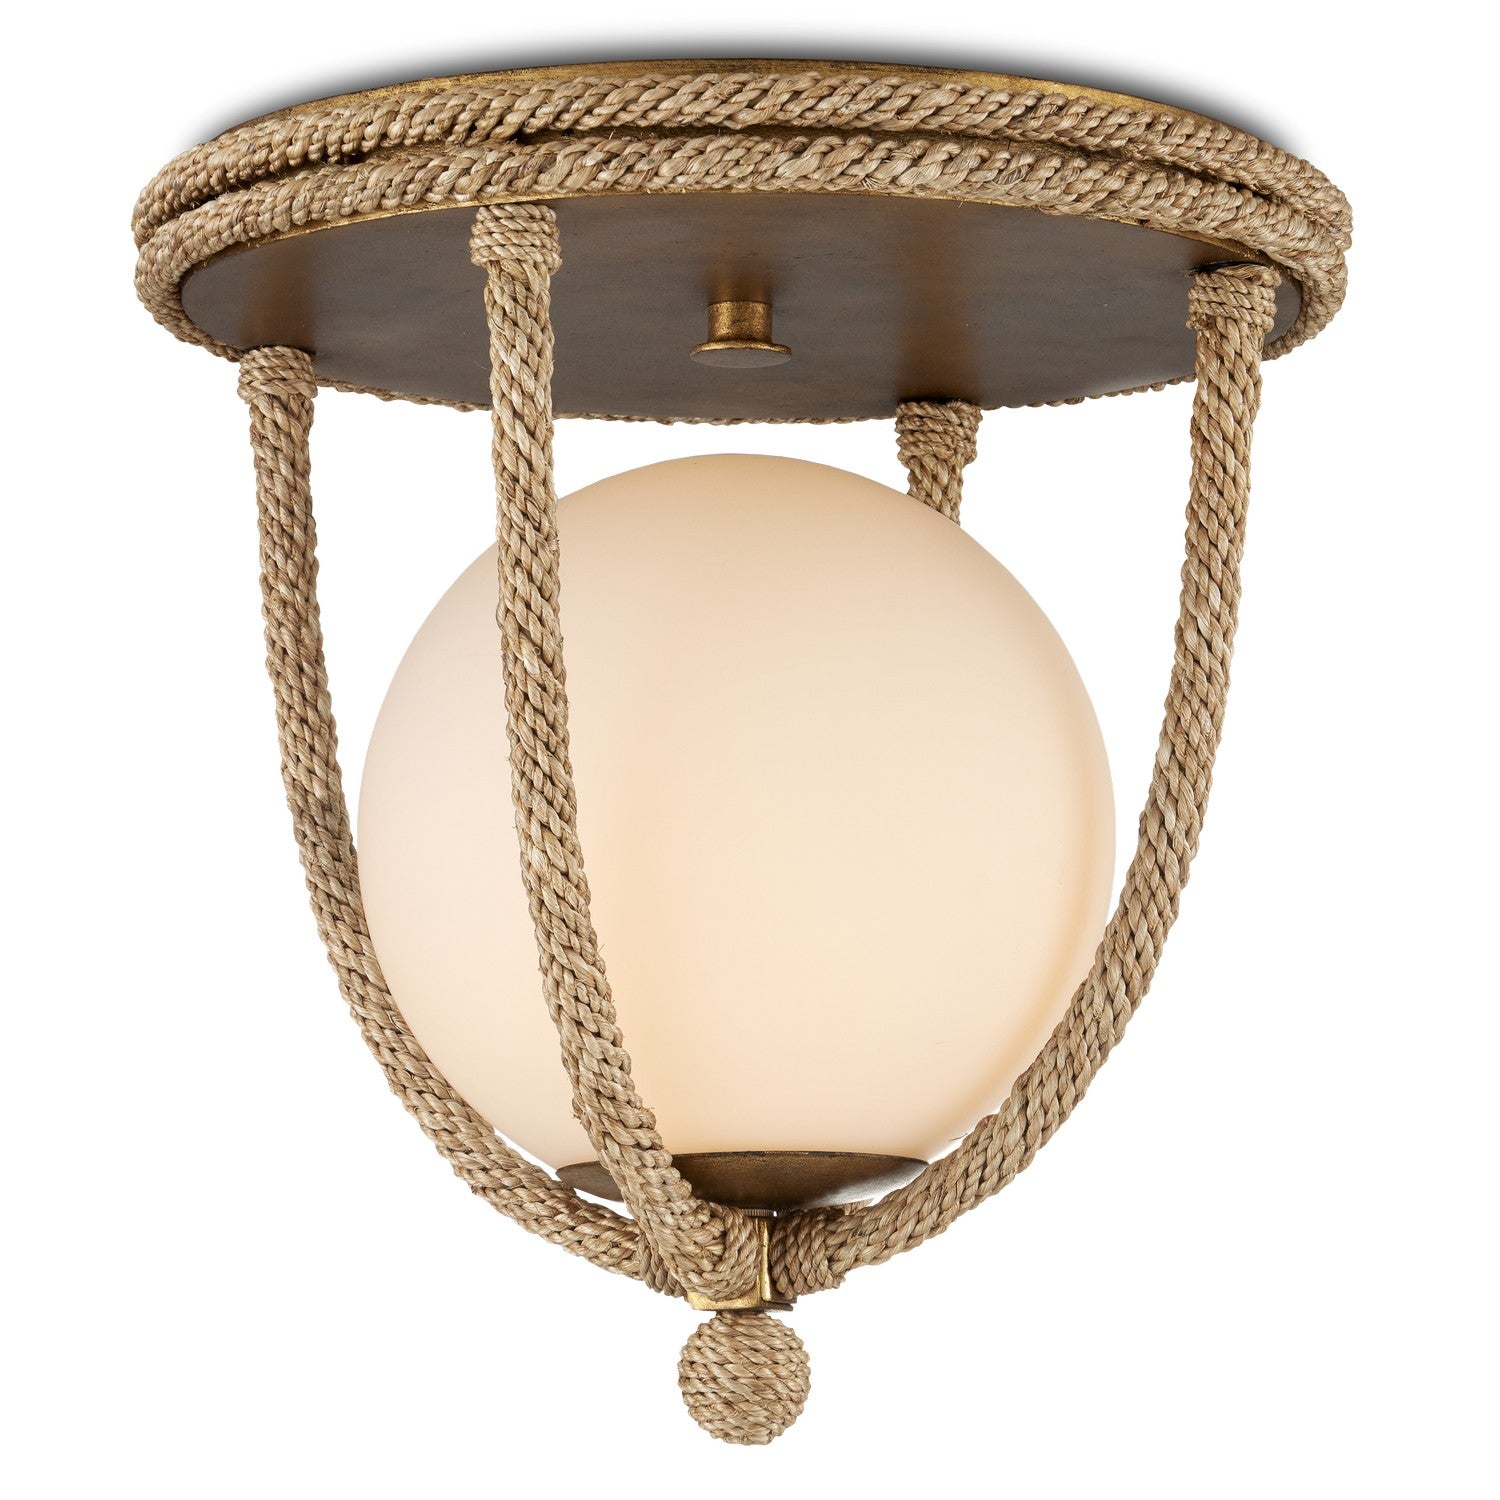 Currey and Company - 9999-0069 - One Light Flush Mount - Passageway - Natural/Dorado Gold/Frosted White